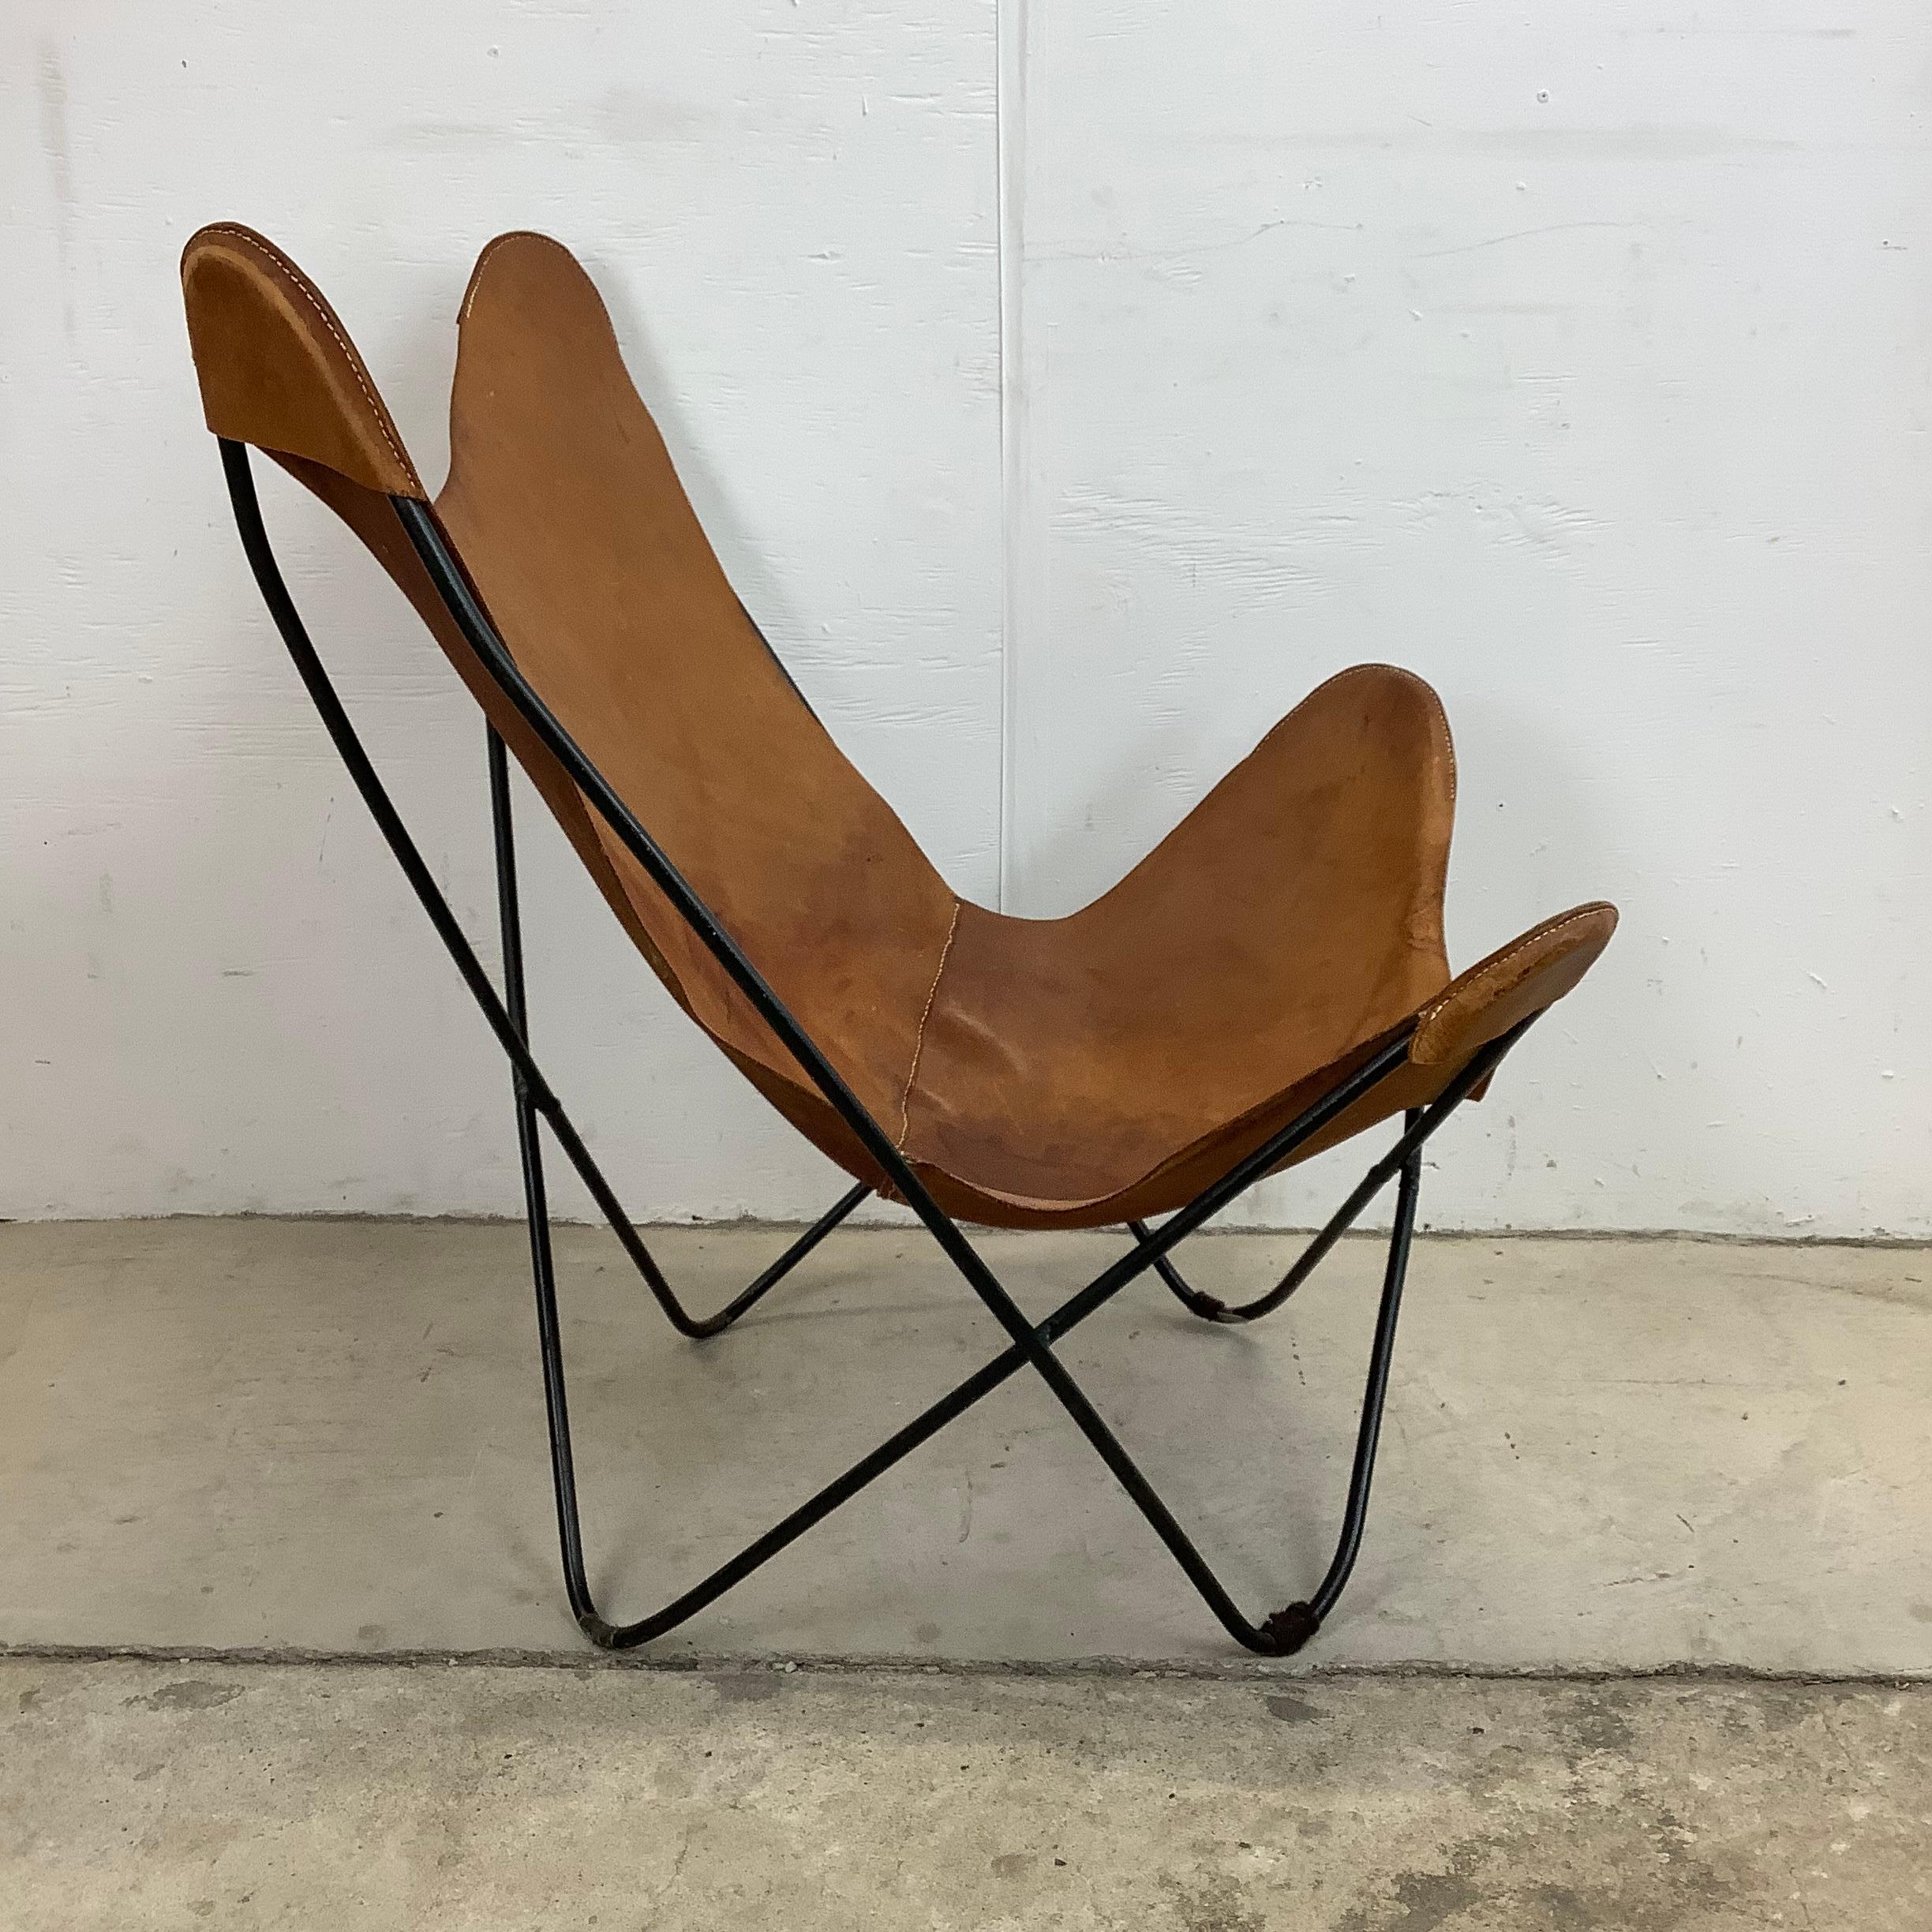 Unknown Vintage Modern Butterfly Chair With Iron Frame And Leather Seat